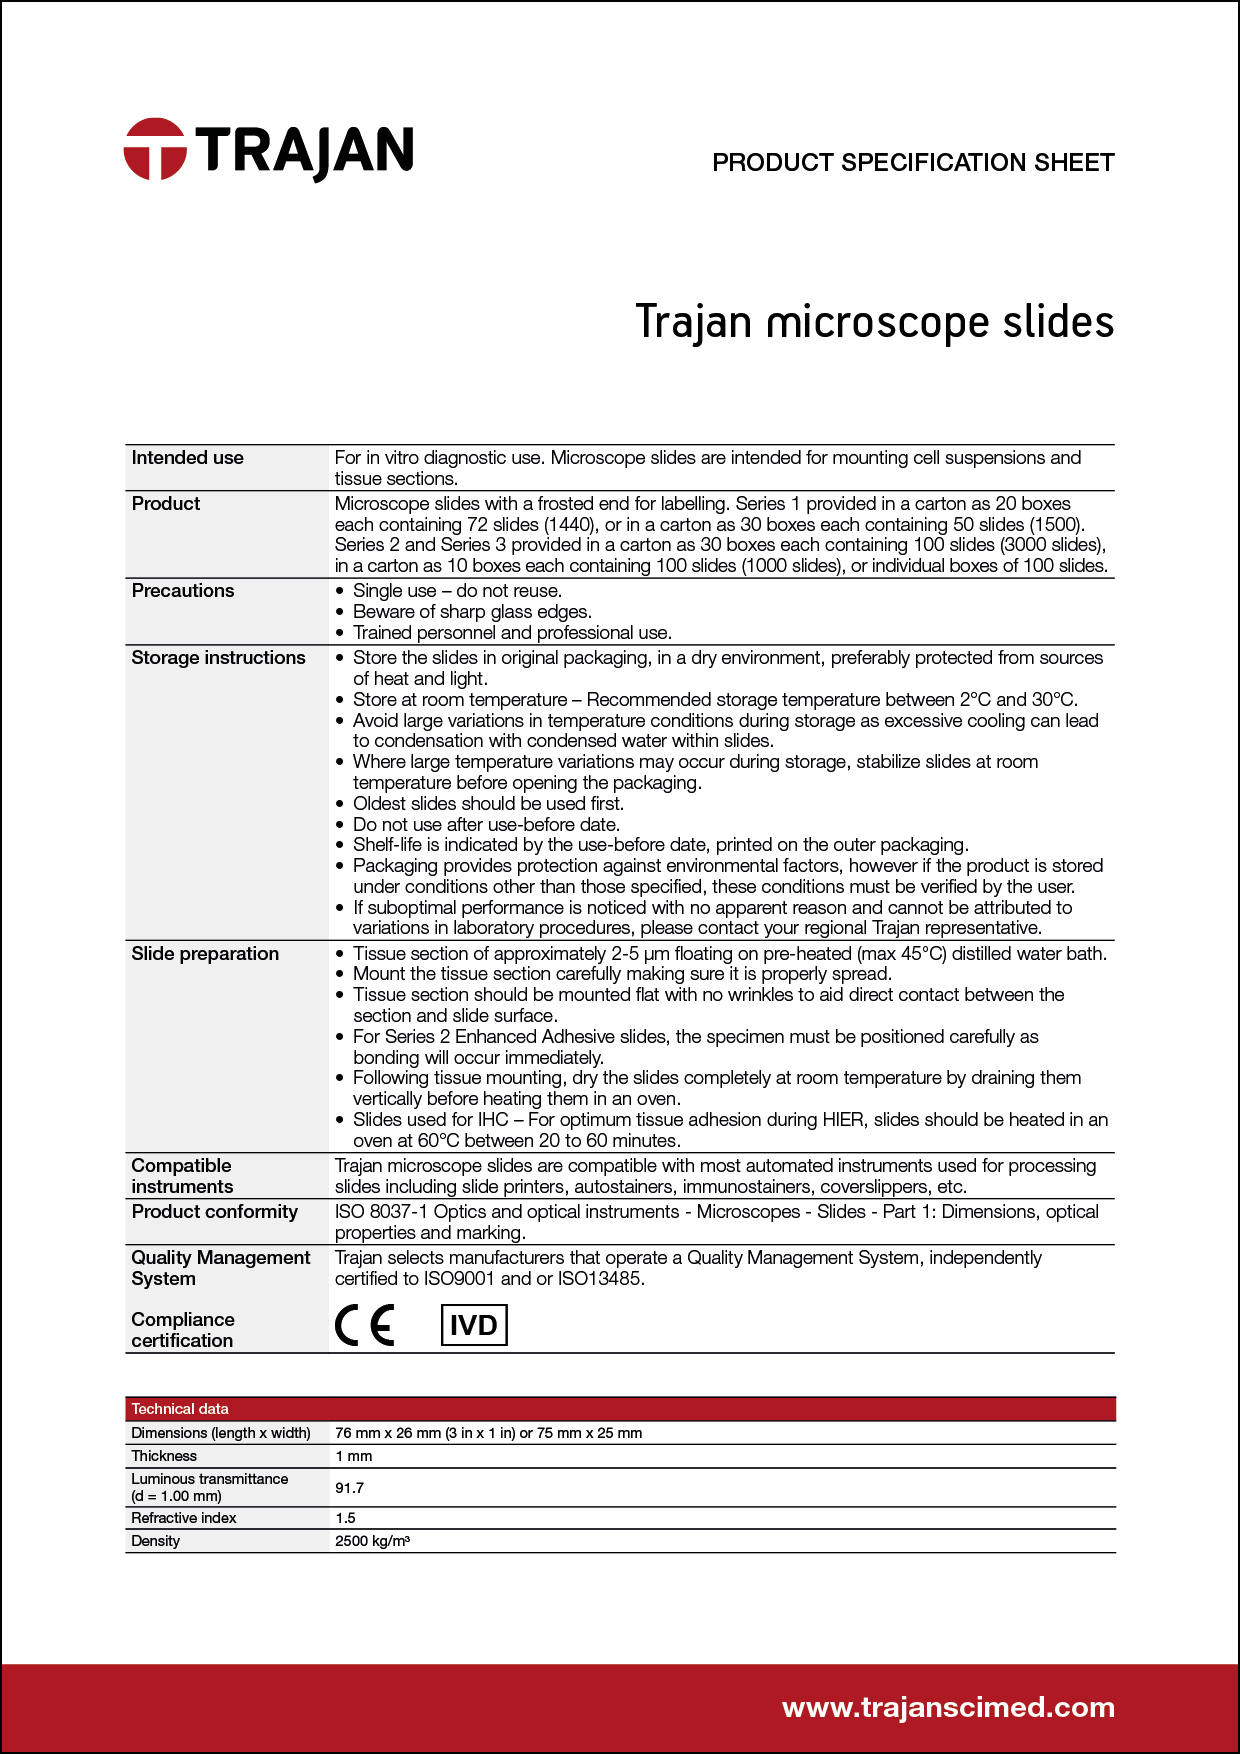 Product Specification Sheet - Trajan microscope slides